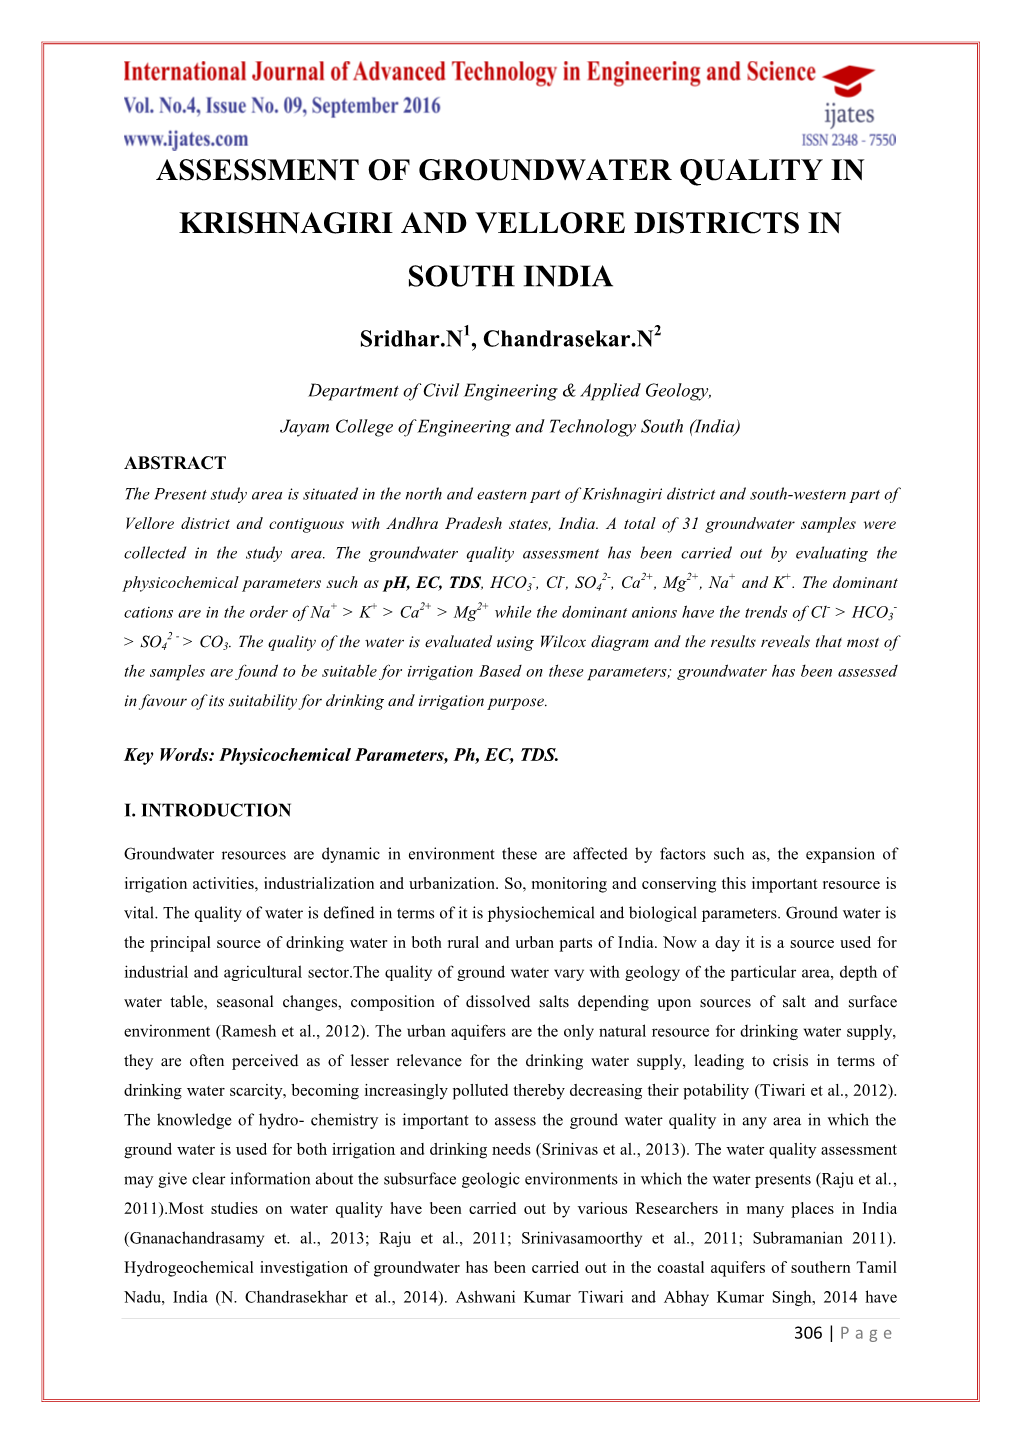 Assessment of Groundwater Quality in Krishnagiri and Vellore Districts in South India